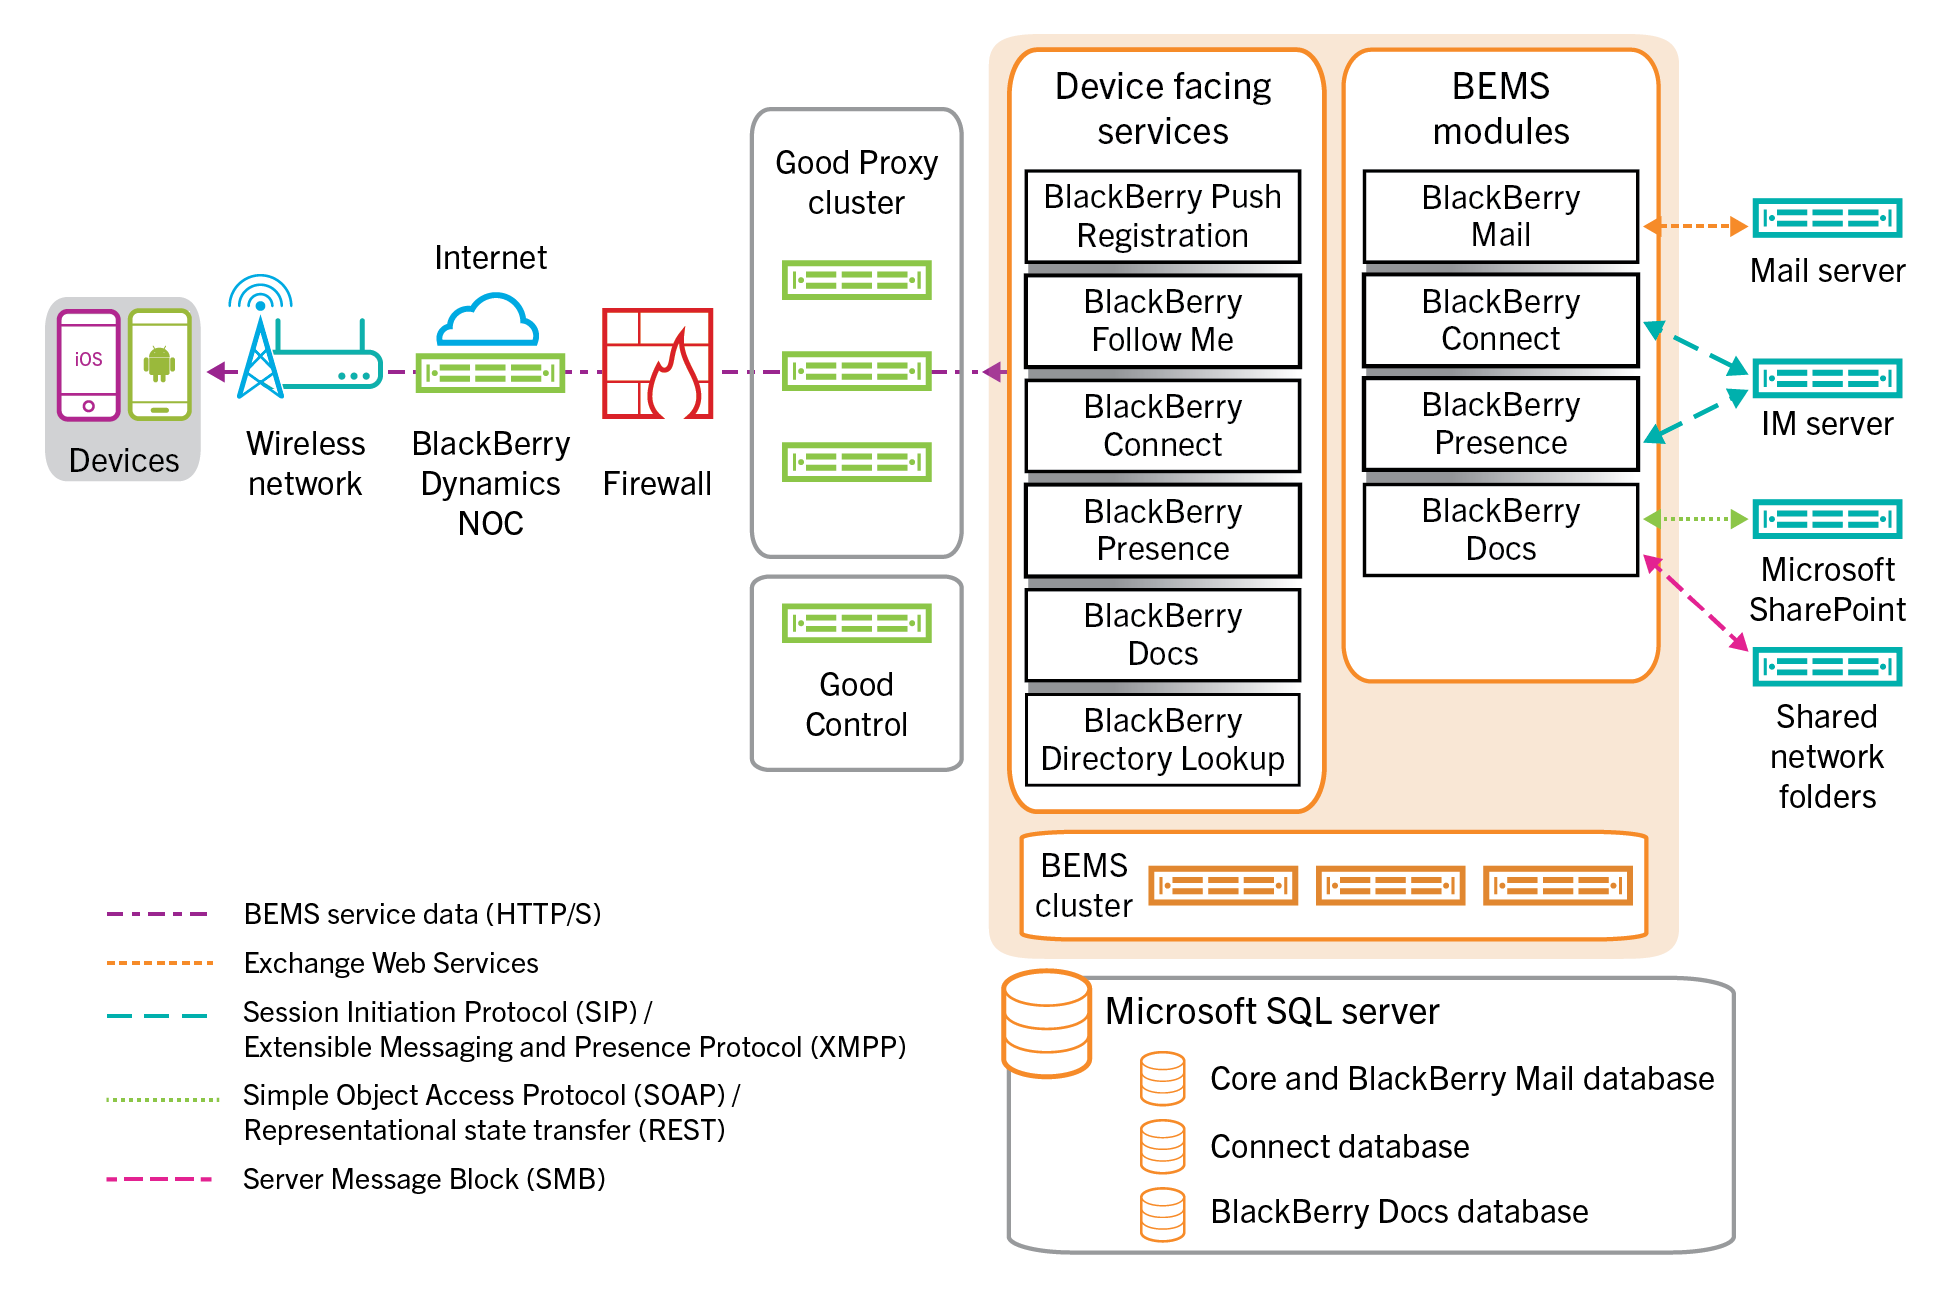 The BEMS components diagram